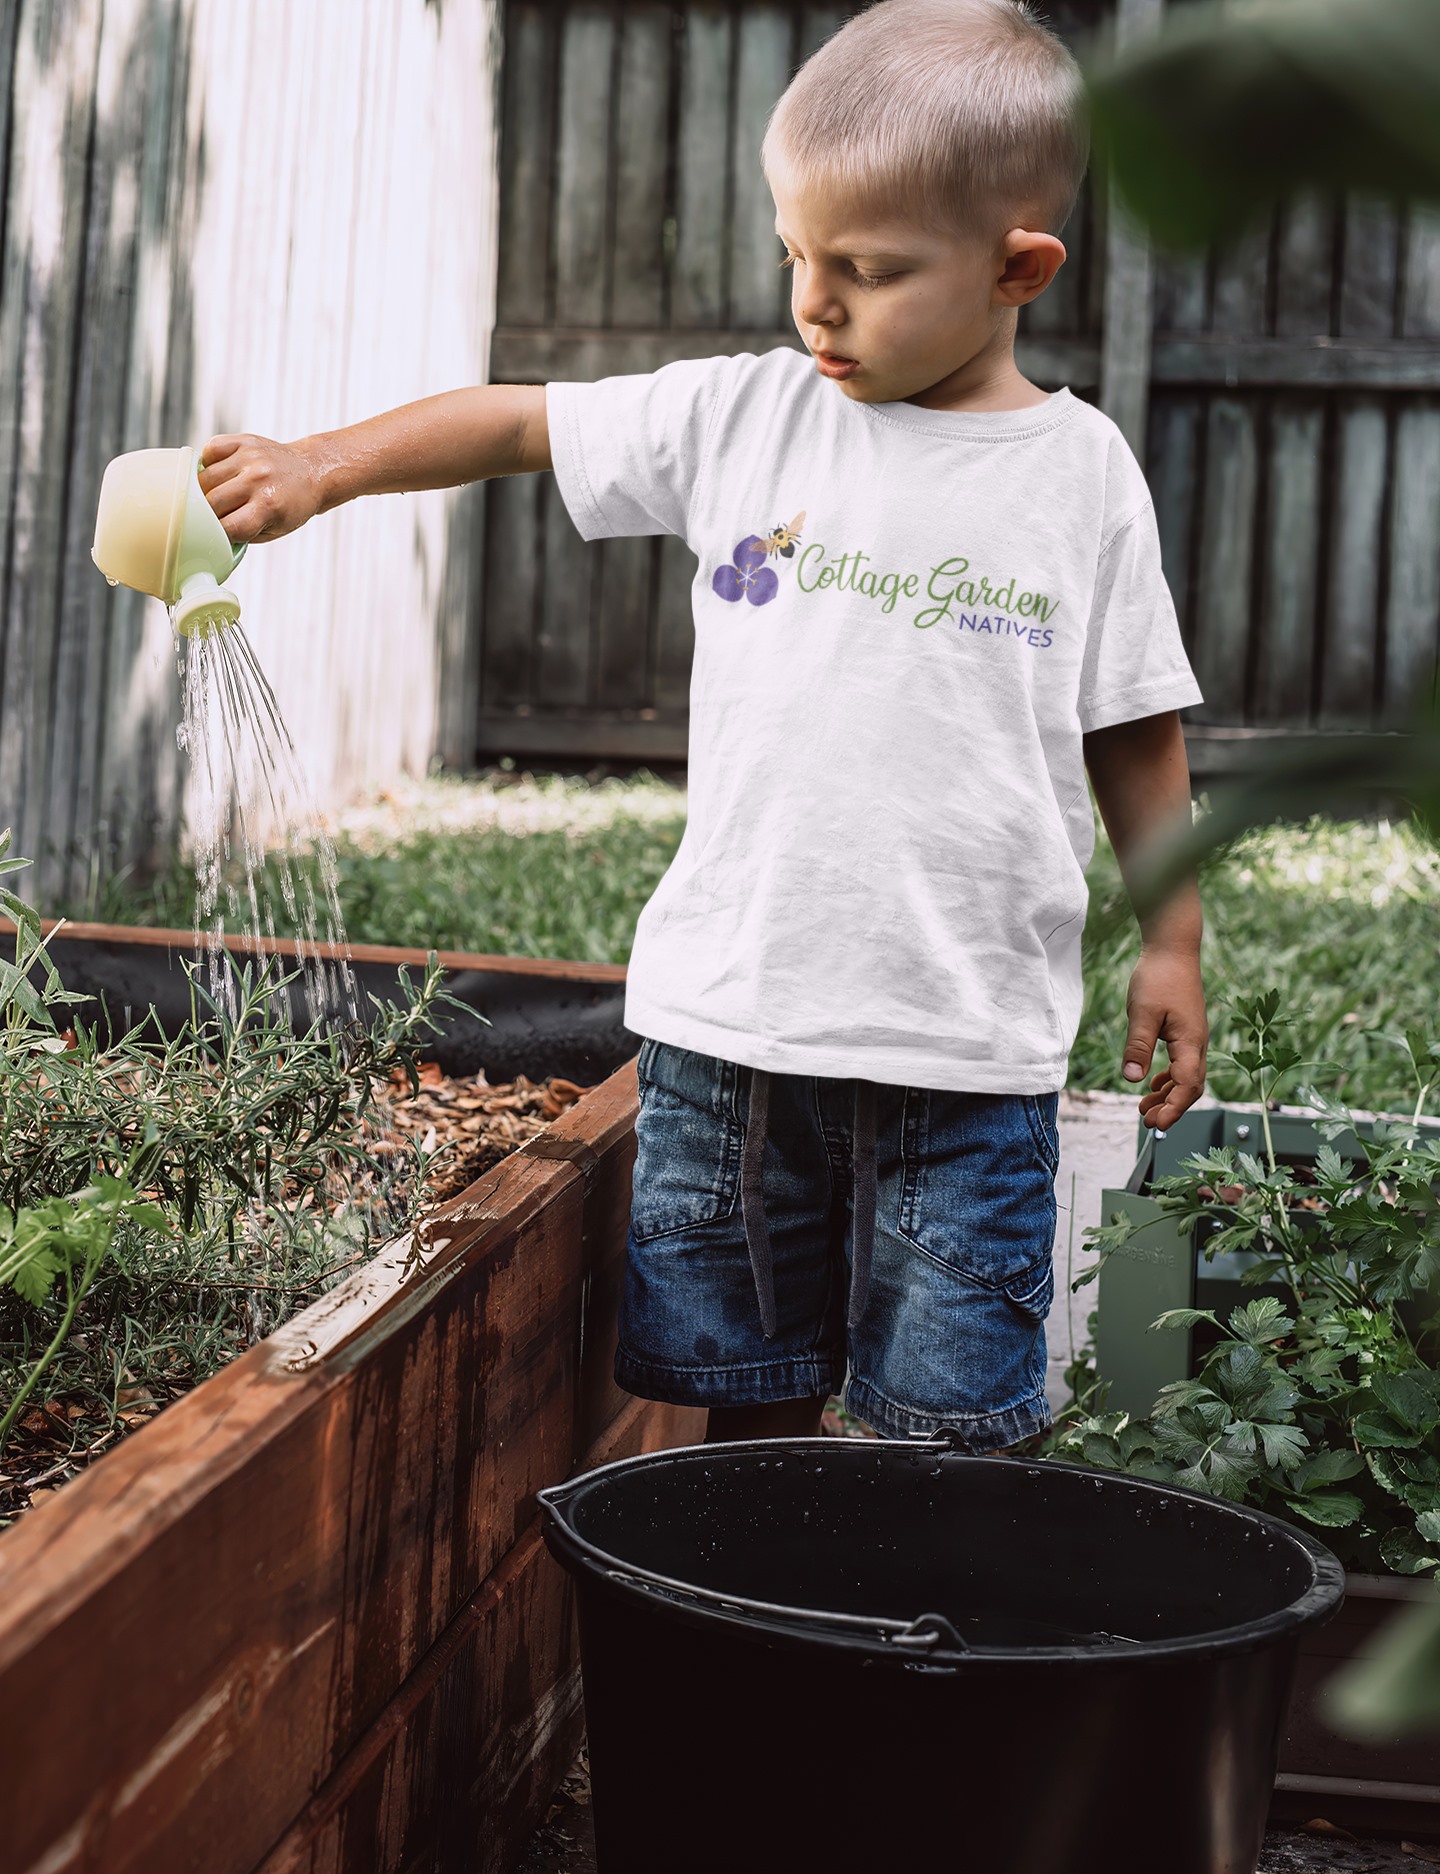 A custom logo design for Cottage Garden Natives with a bee and flower icon shown on a t-shirt worn by a child watering plants in a garden